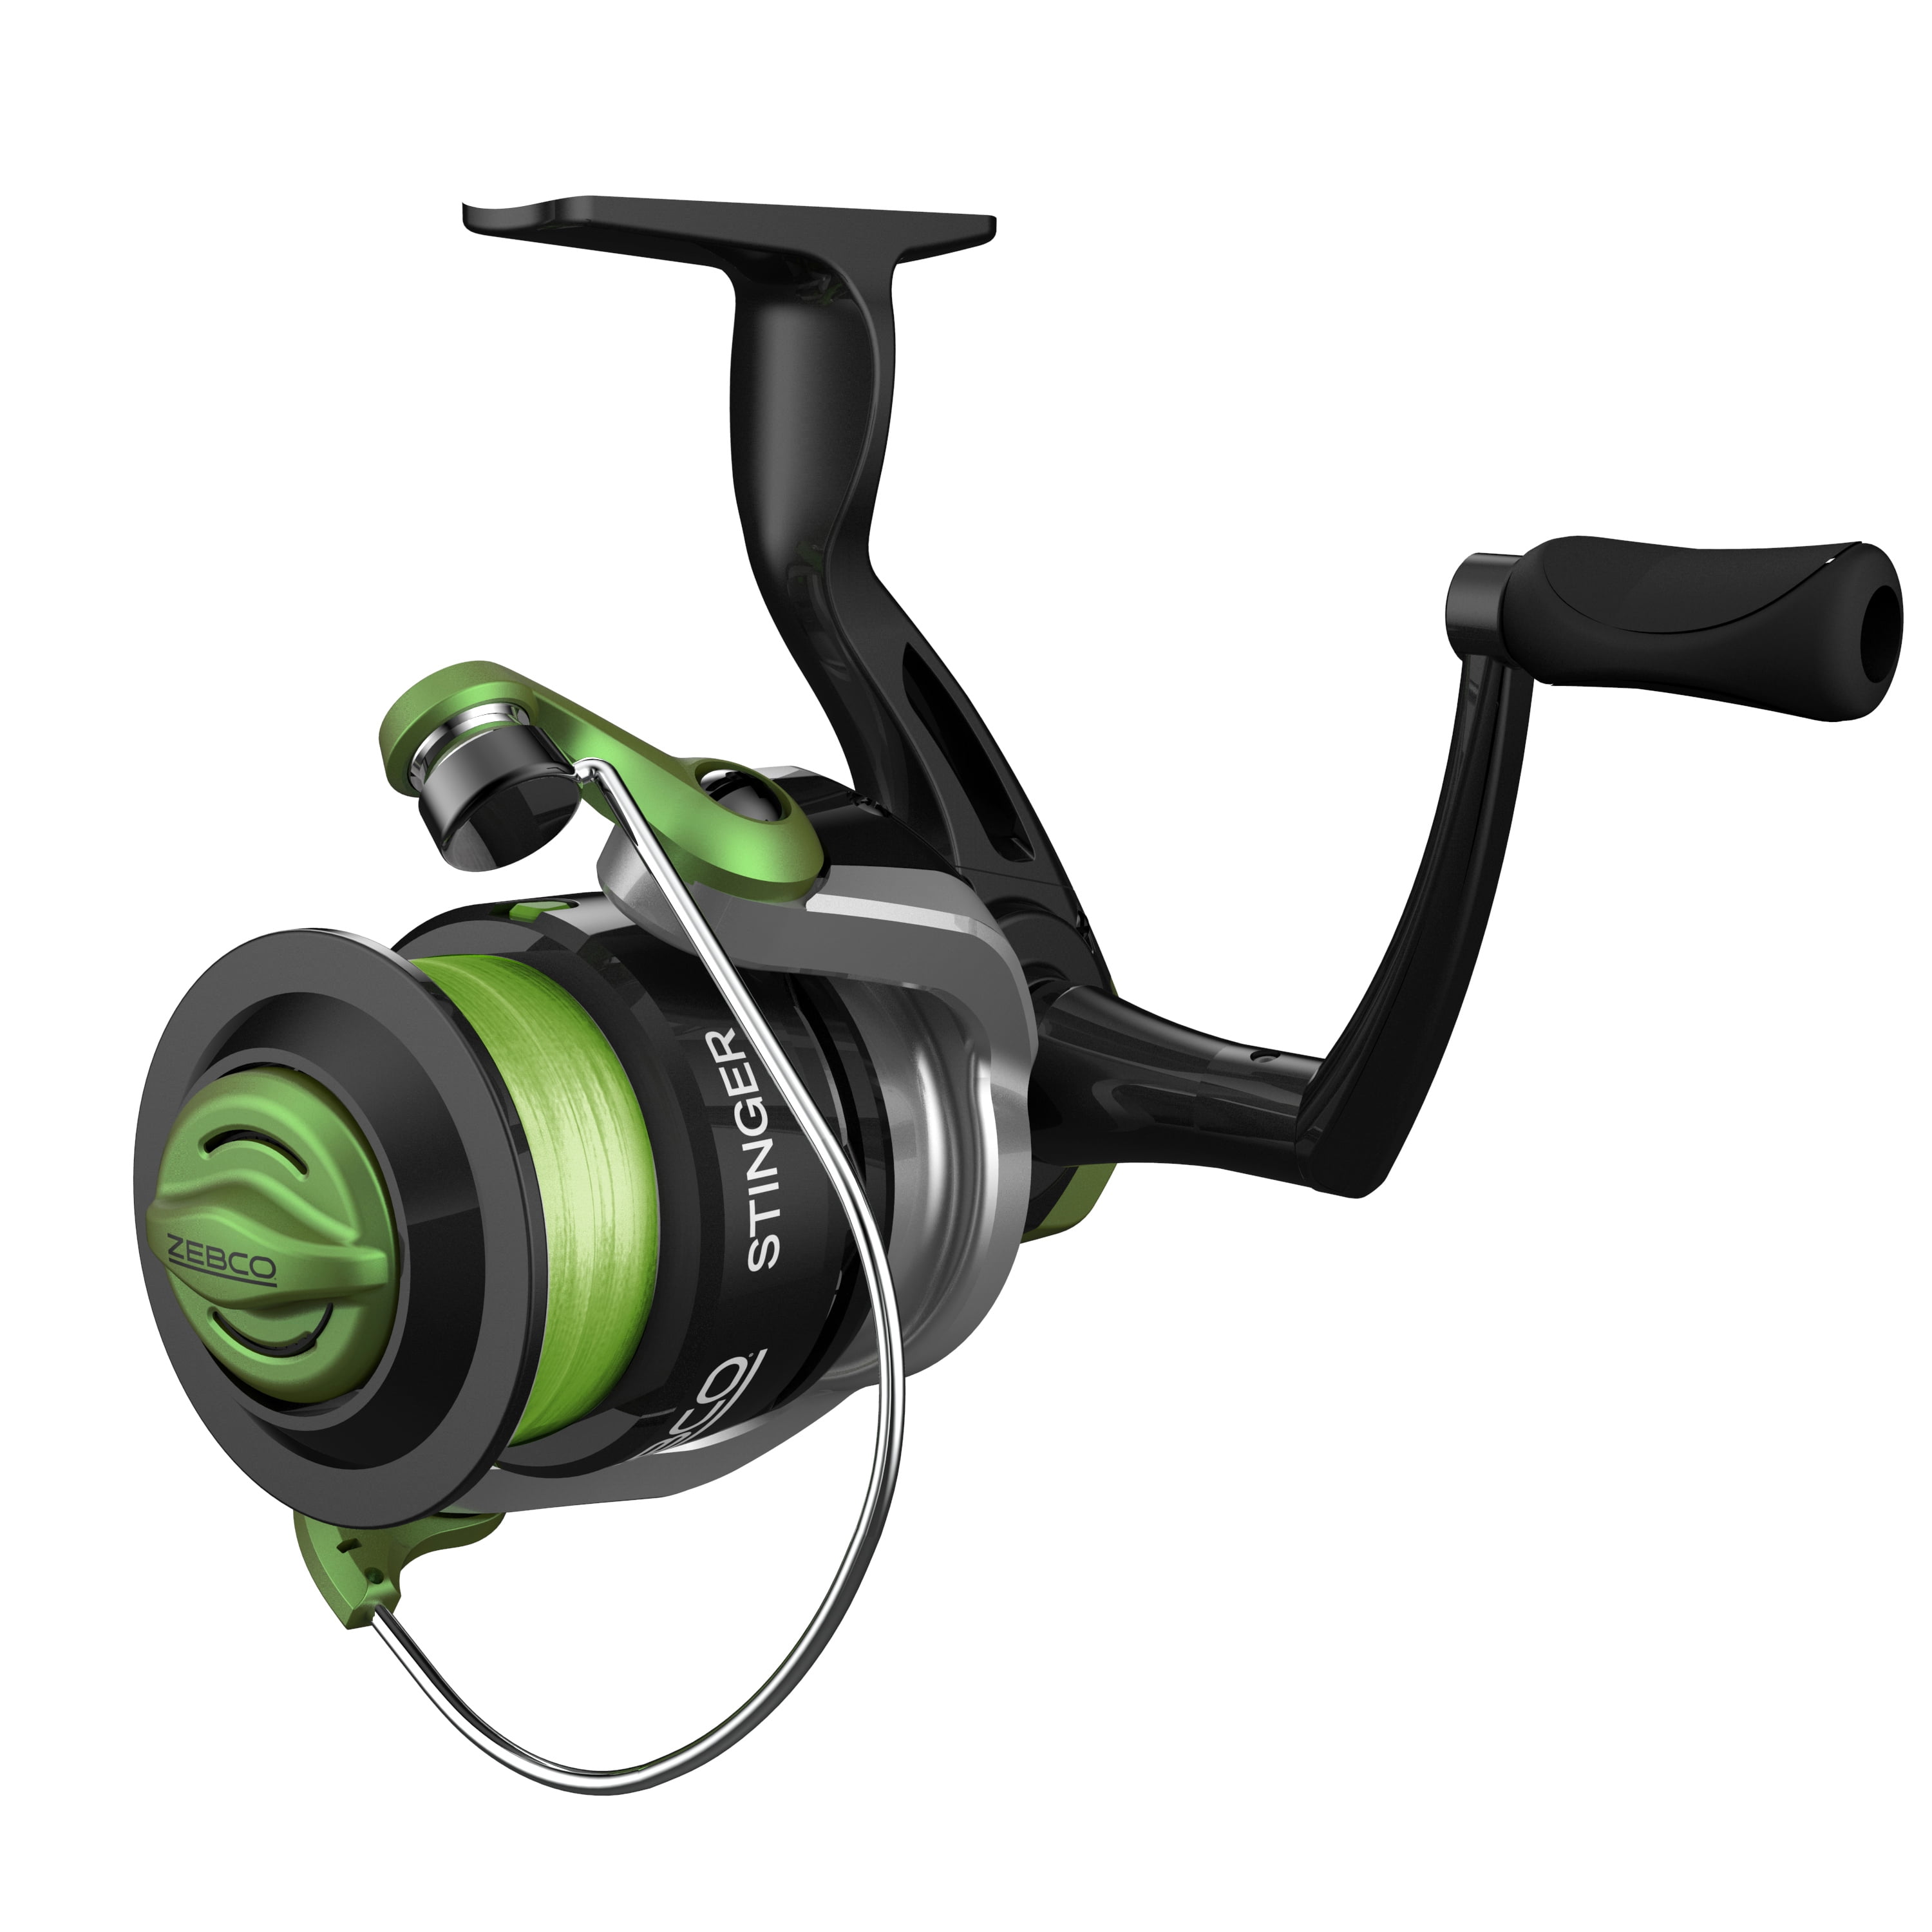  Zebco 202 Spincast Fishing Reel, Size 30 Reel, Right-Hand  Retrieve, Durable All-Metal Gears, Stainless Steel Pick-up Pin, Pre-Spooled  with 10-Pound Zebco Fishing Line, Black, Clam Packaging : Sports & Outdoors